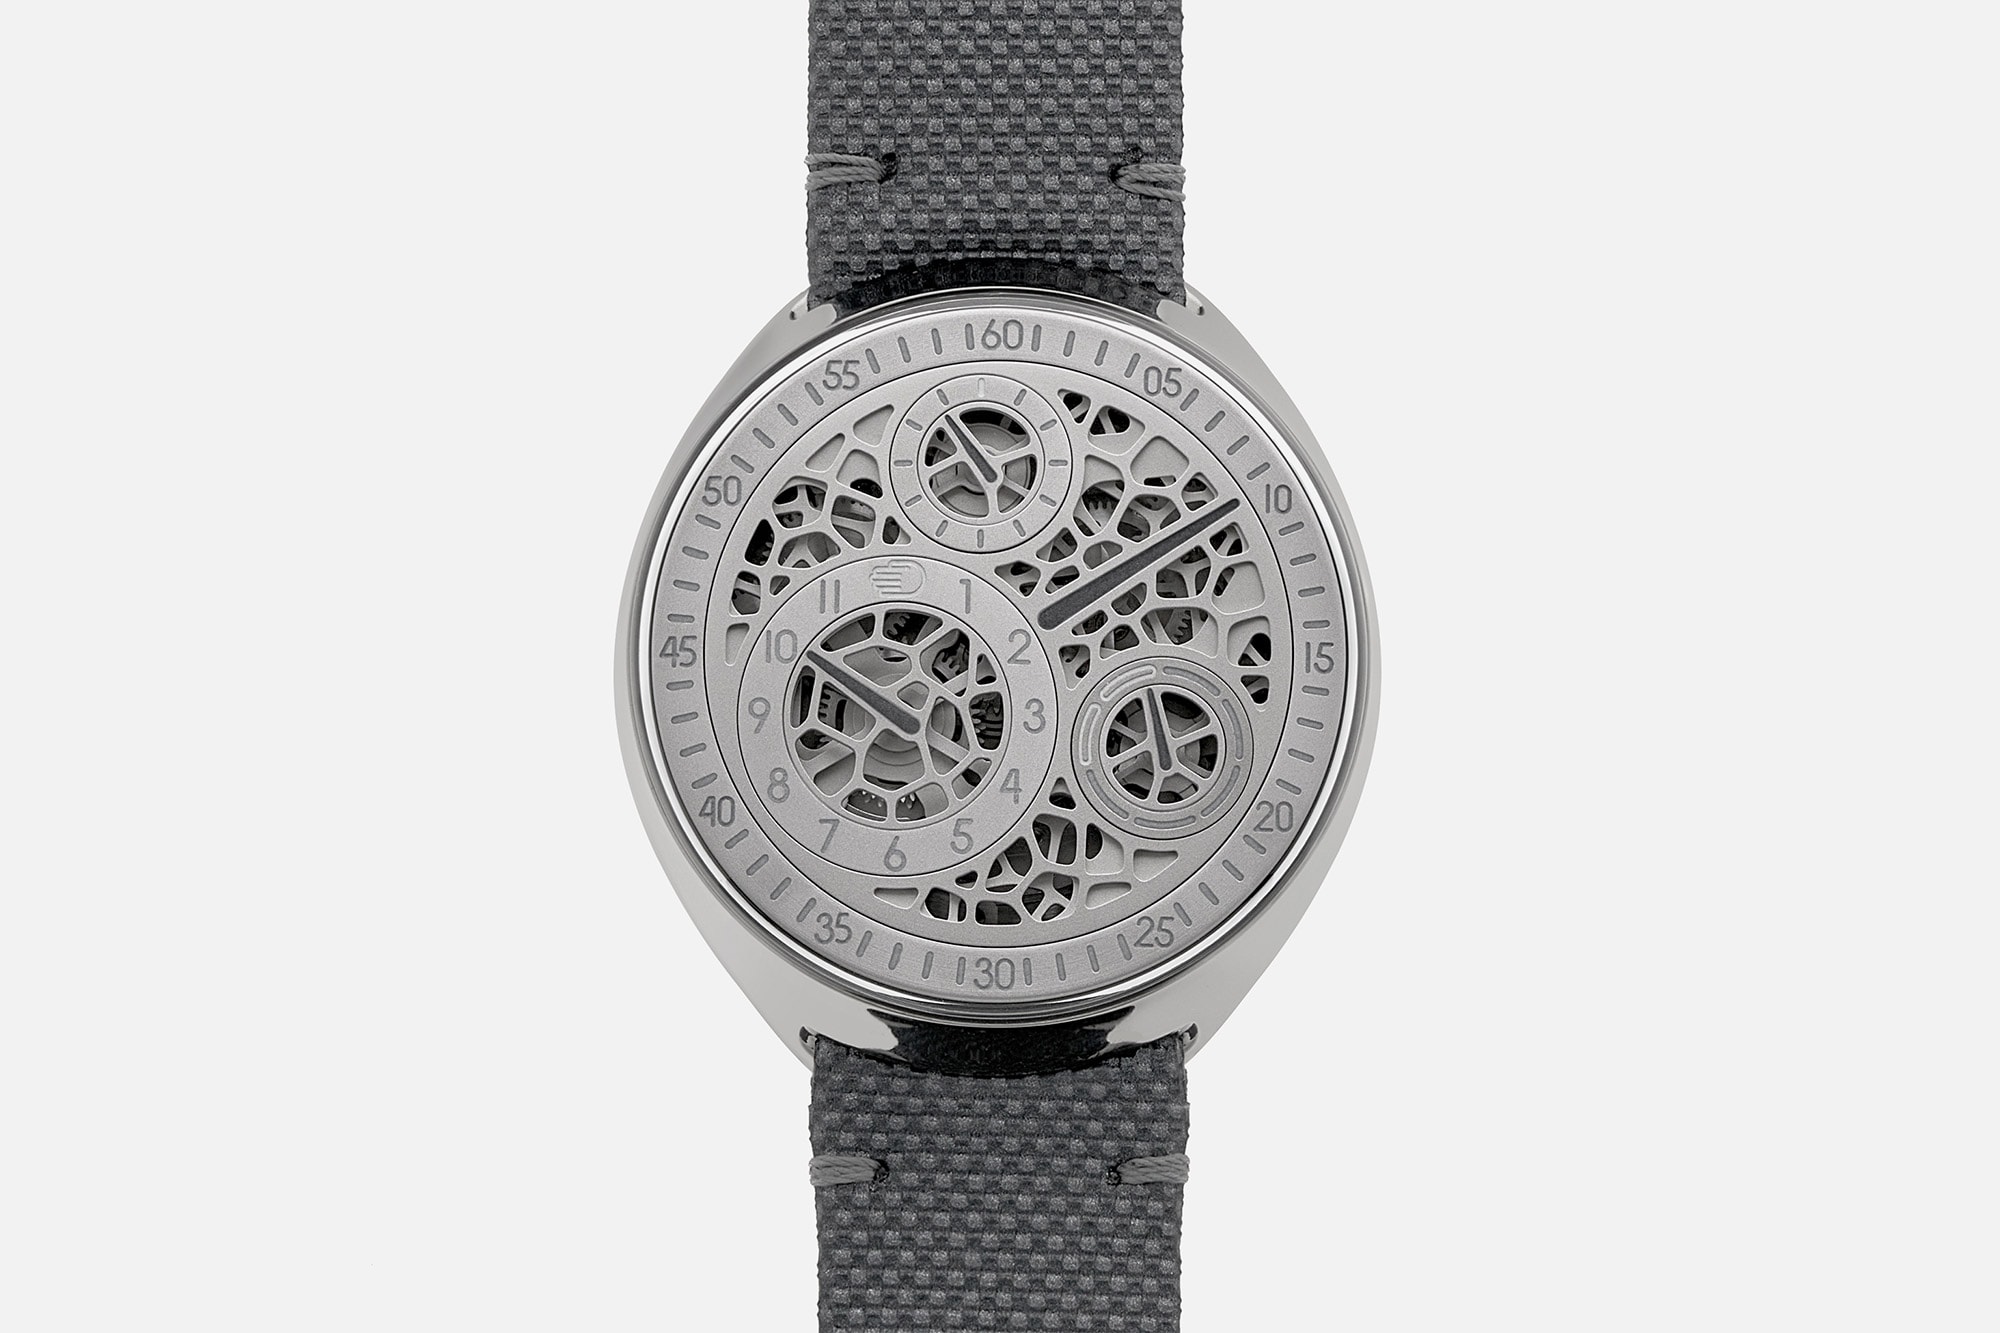 Hodinkee and Ressence Release their Second Collaboration, a Type 1 Slim with a Unique Honeycomb Dial